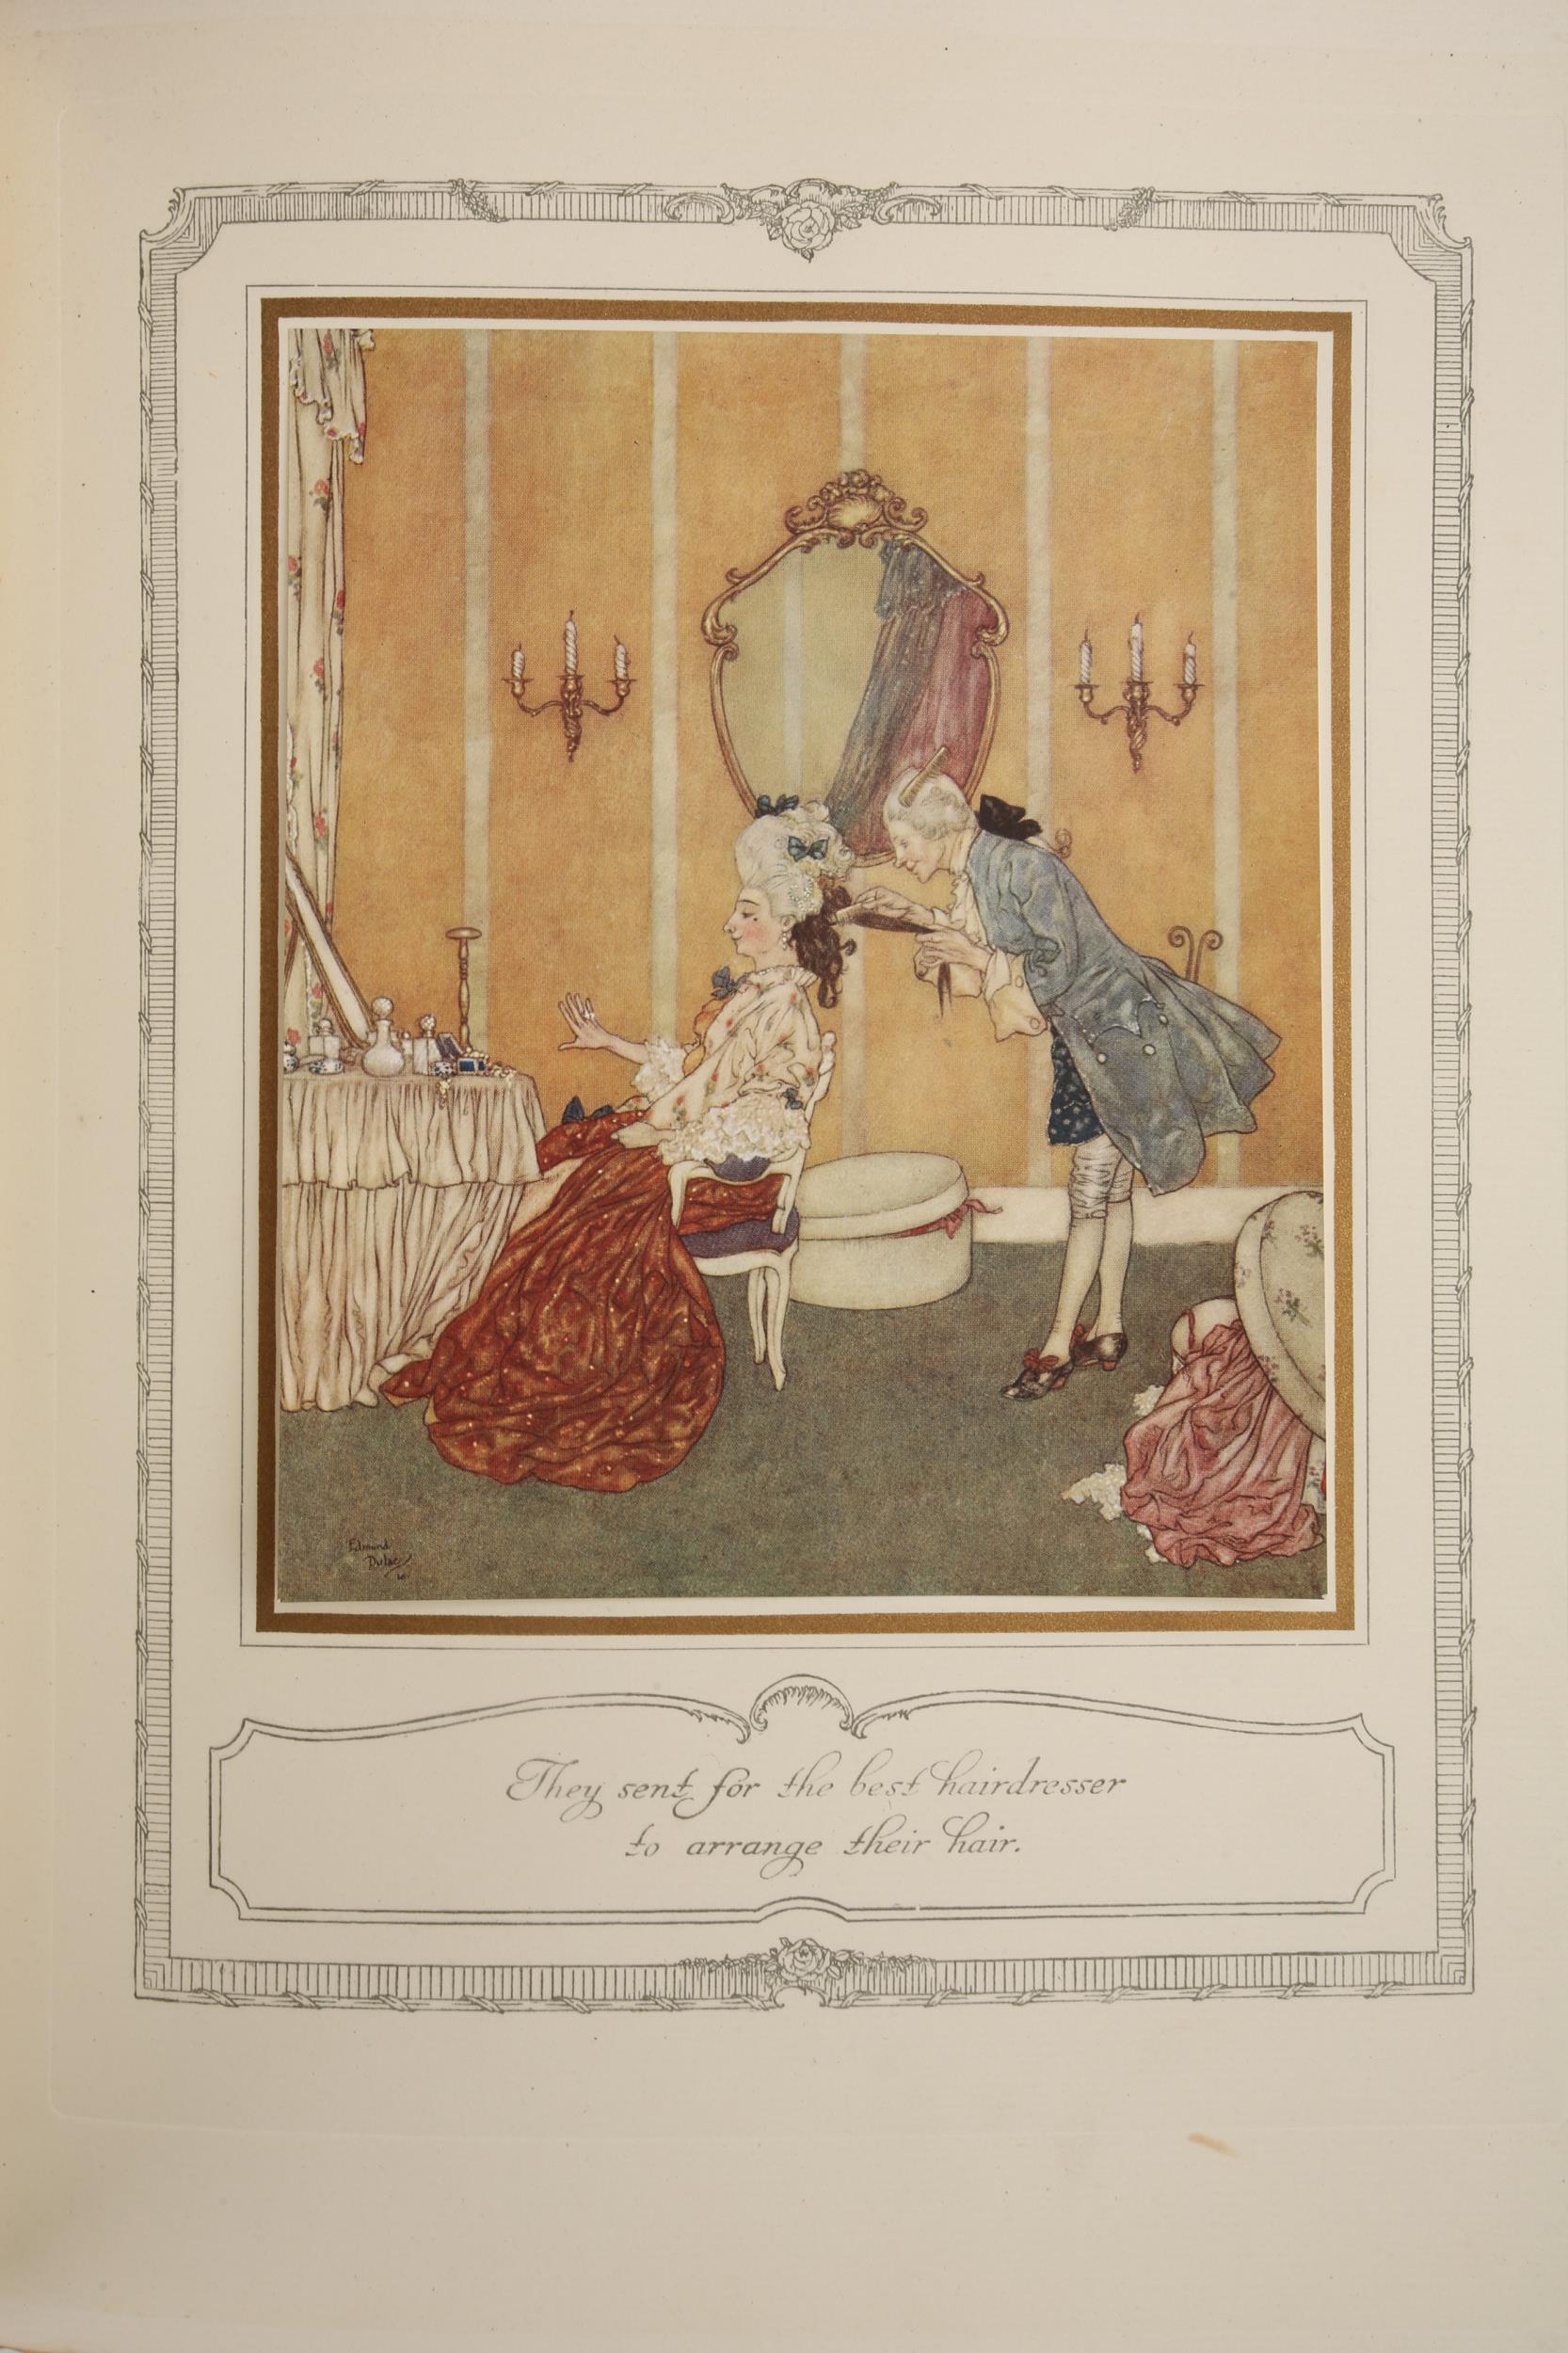 Arthur Quiller-Couch, 'The Sleeping Beauty and Other Fairy Tales', London, Hodder & Stoughton, - Image 18 of 21